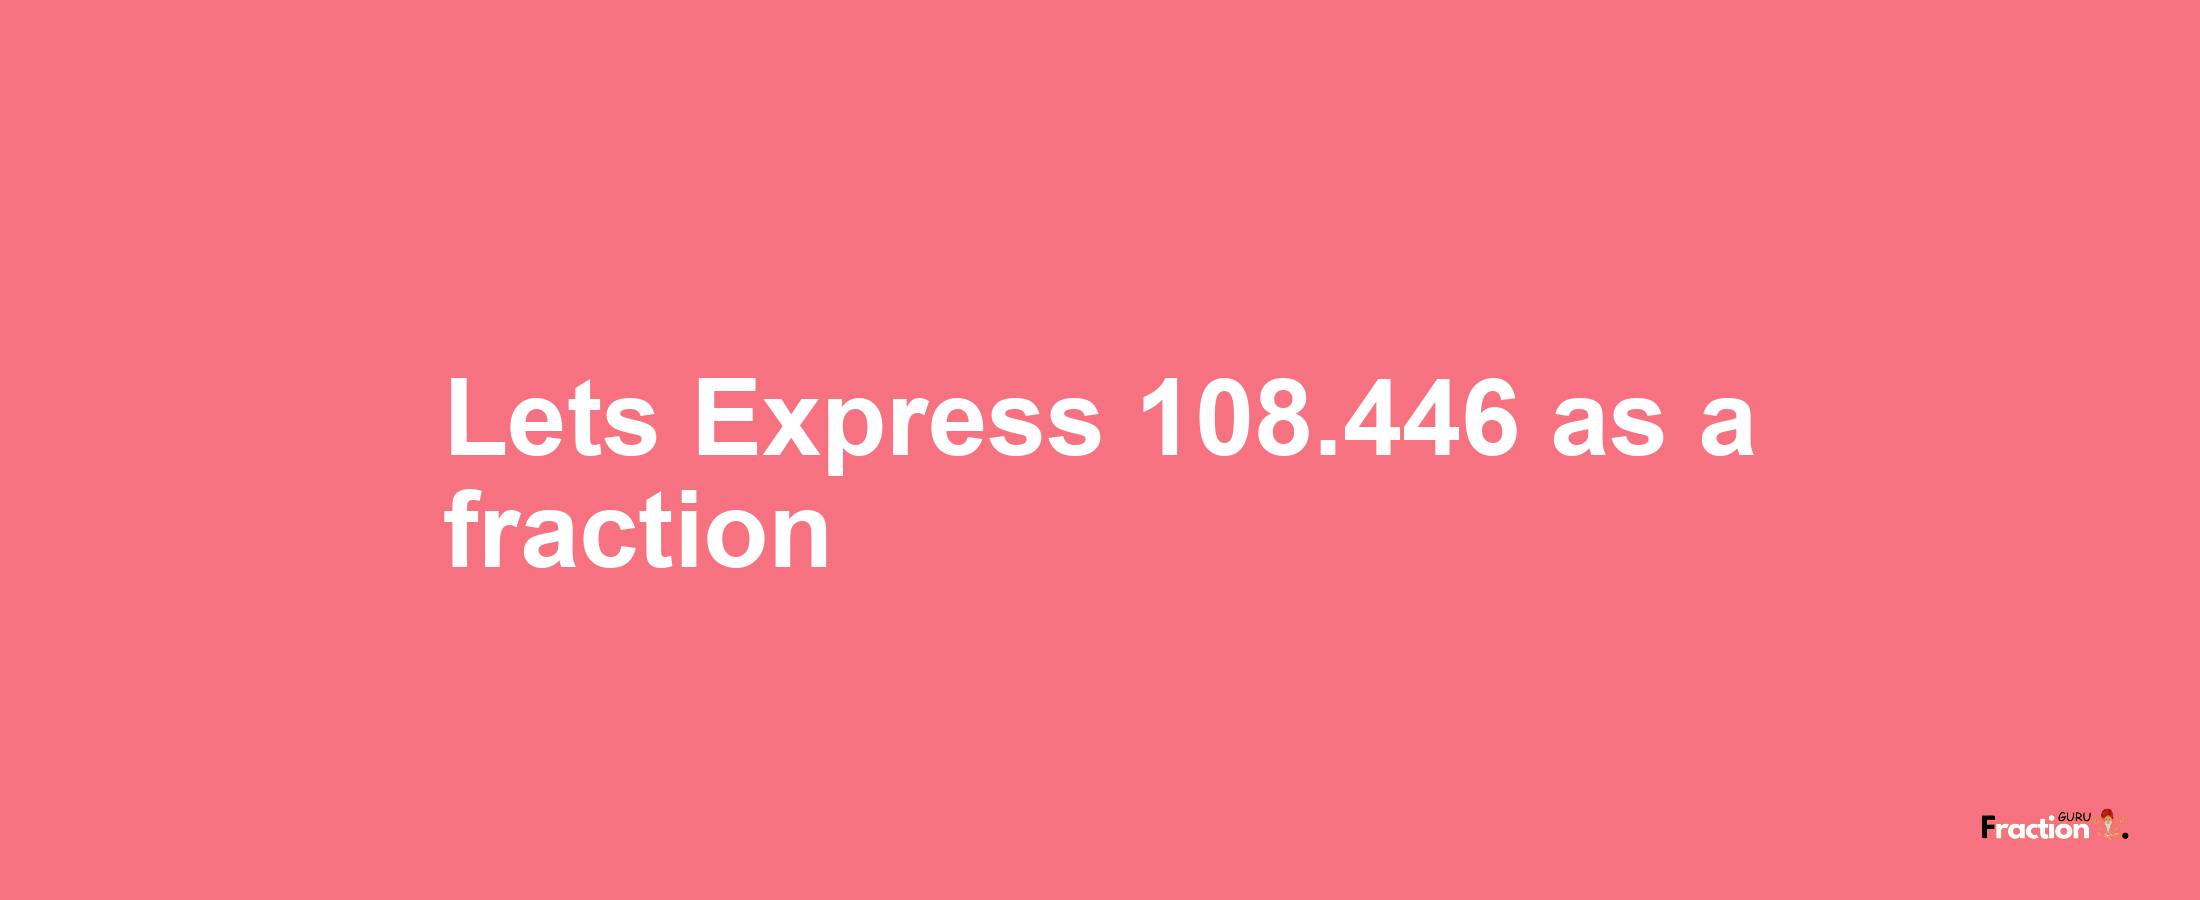 Lets Express 108.446 as afraction